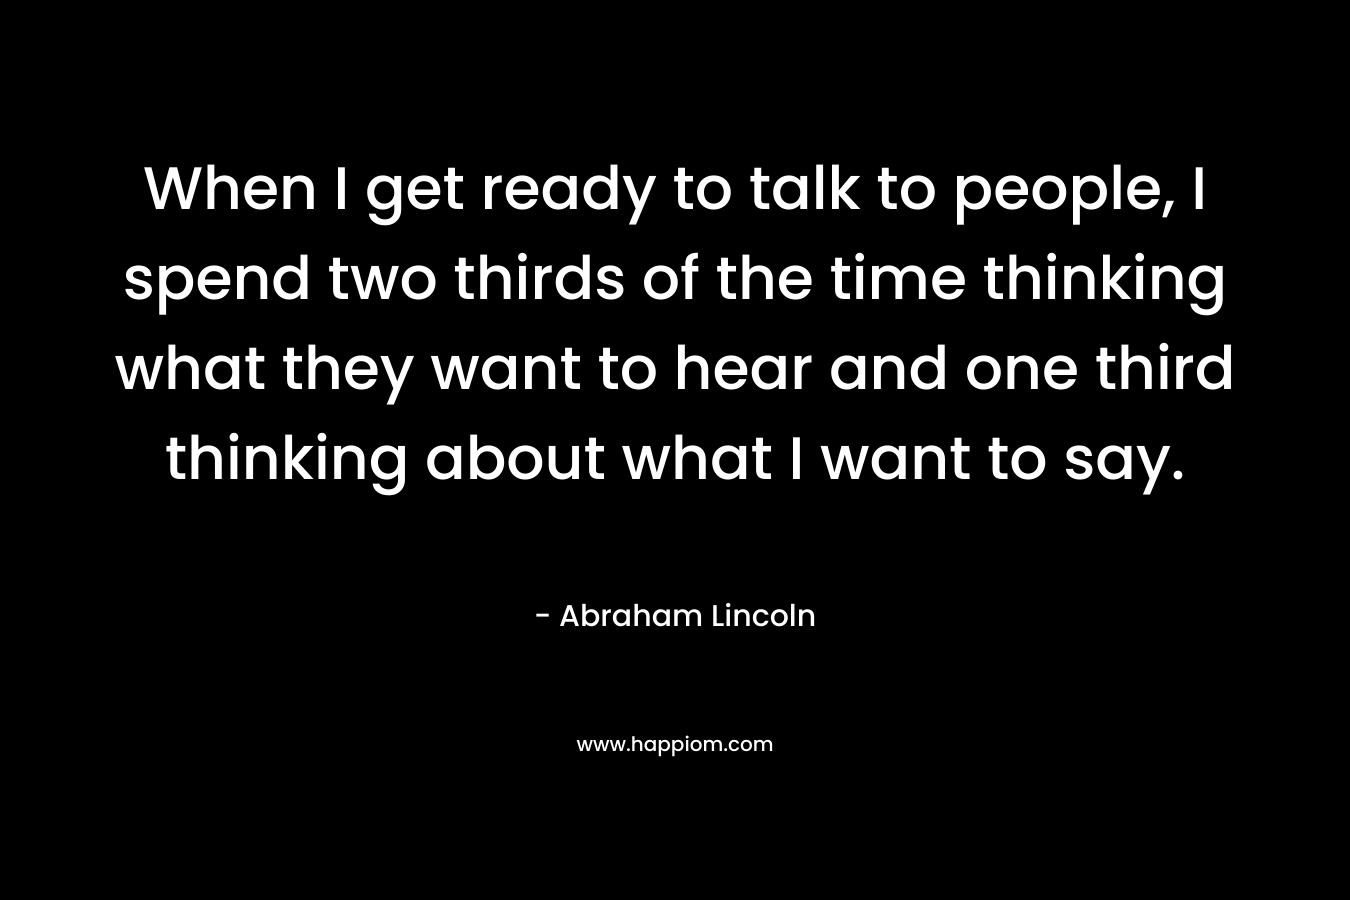 When I get ready to talk to people, I spend two thirds of the time thinking what they want to hear and one third thinking about what I want to say. – Abraham Lincoln